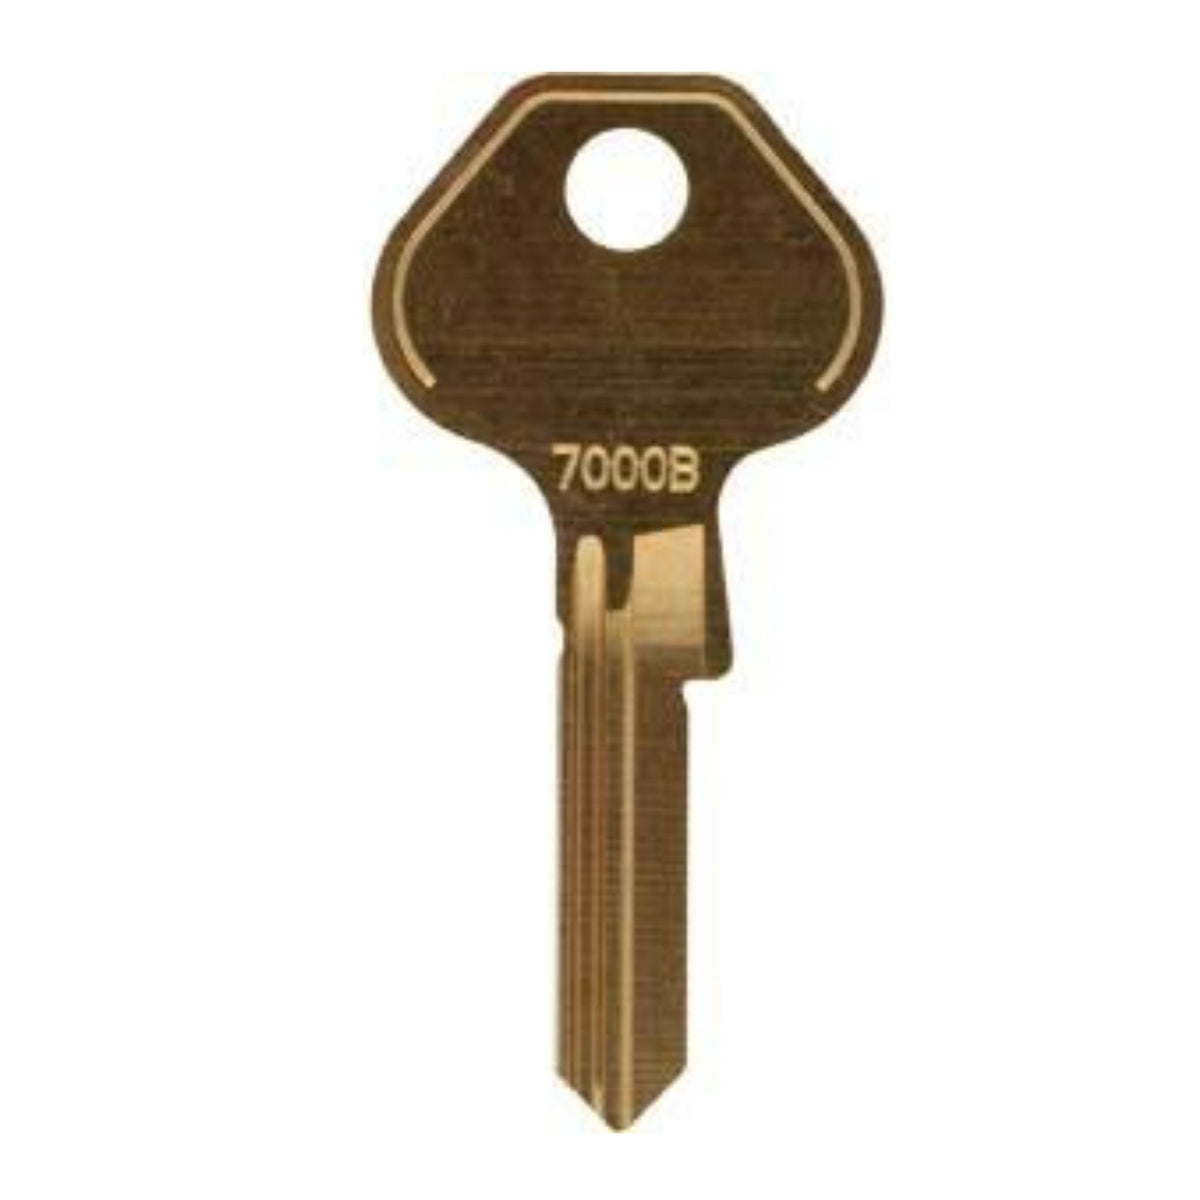 Master Lock K7000 Master Key for W7000 Cylinder - The Lock Source